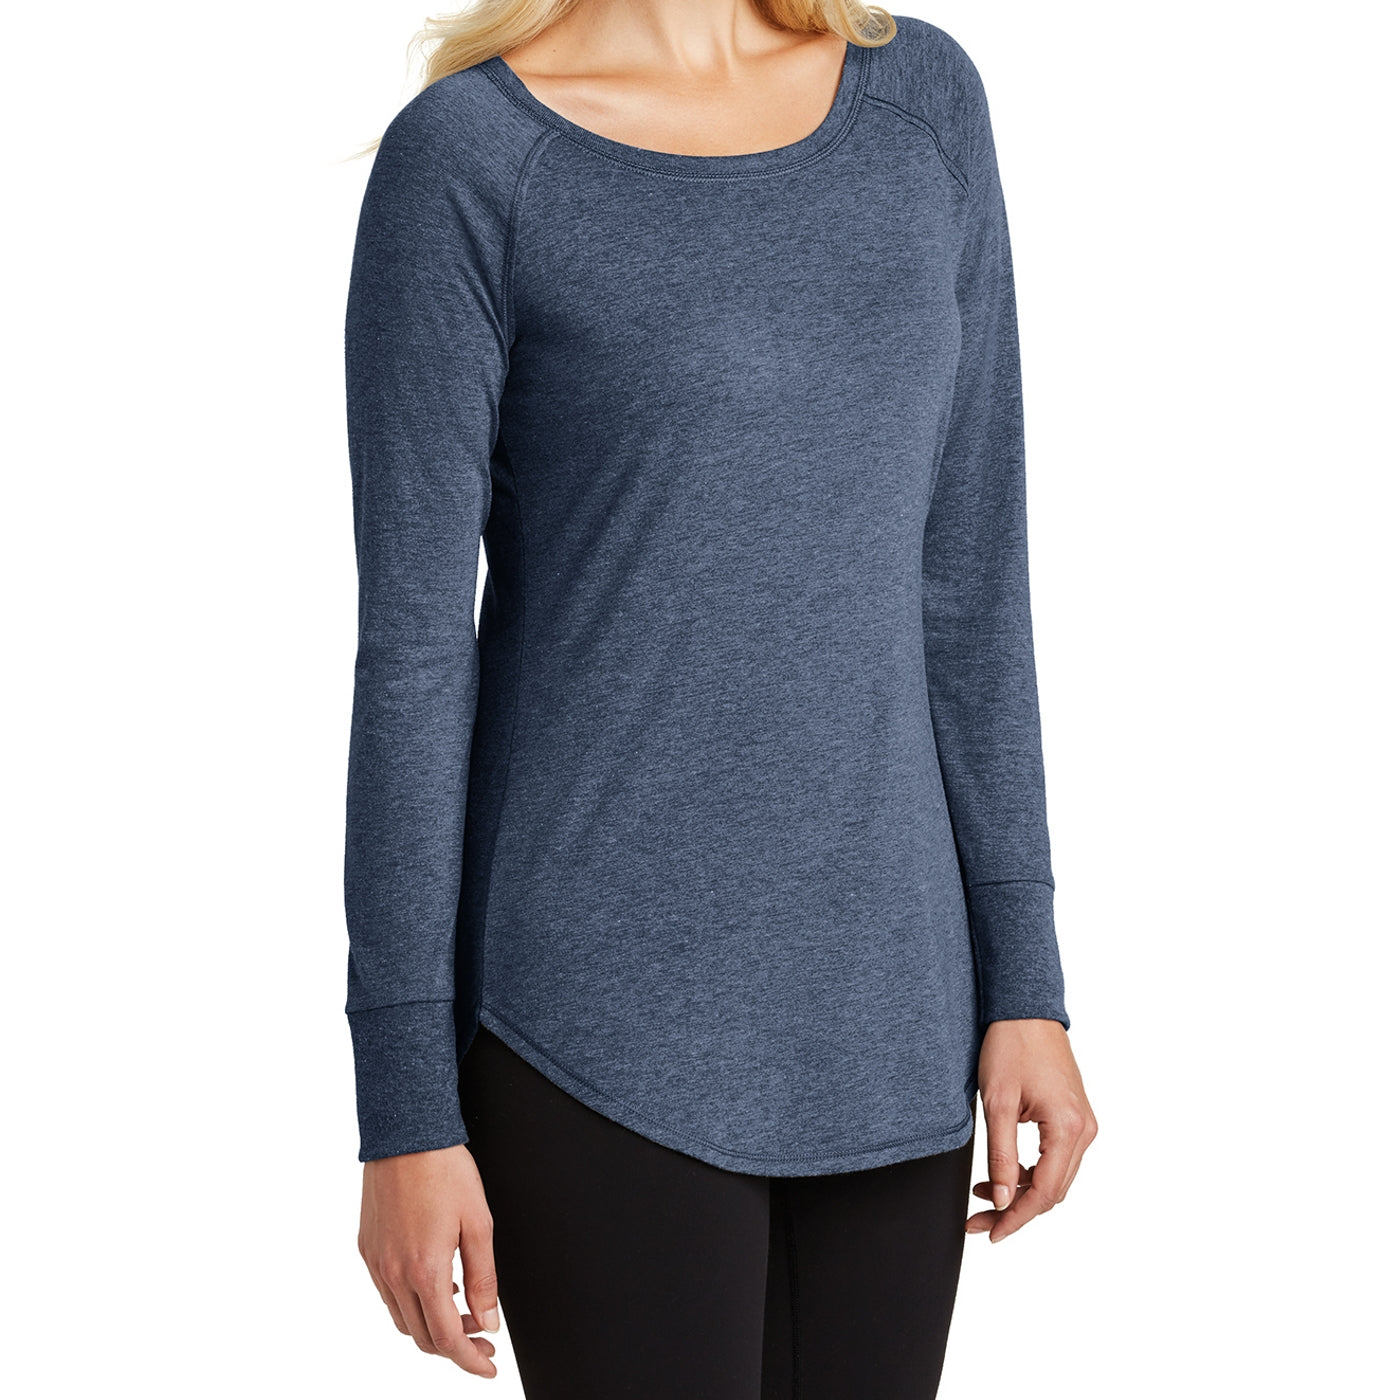 Women's Perfect Tri Long Sleeve Tunic - Navy Frost